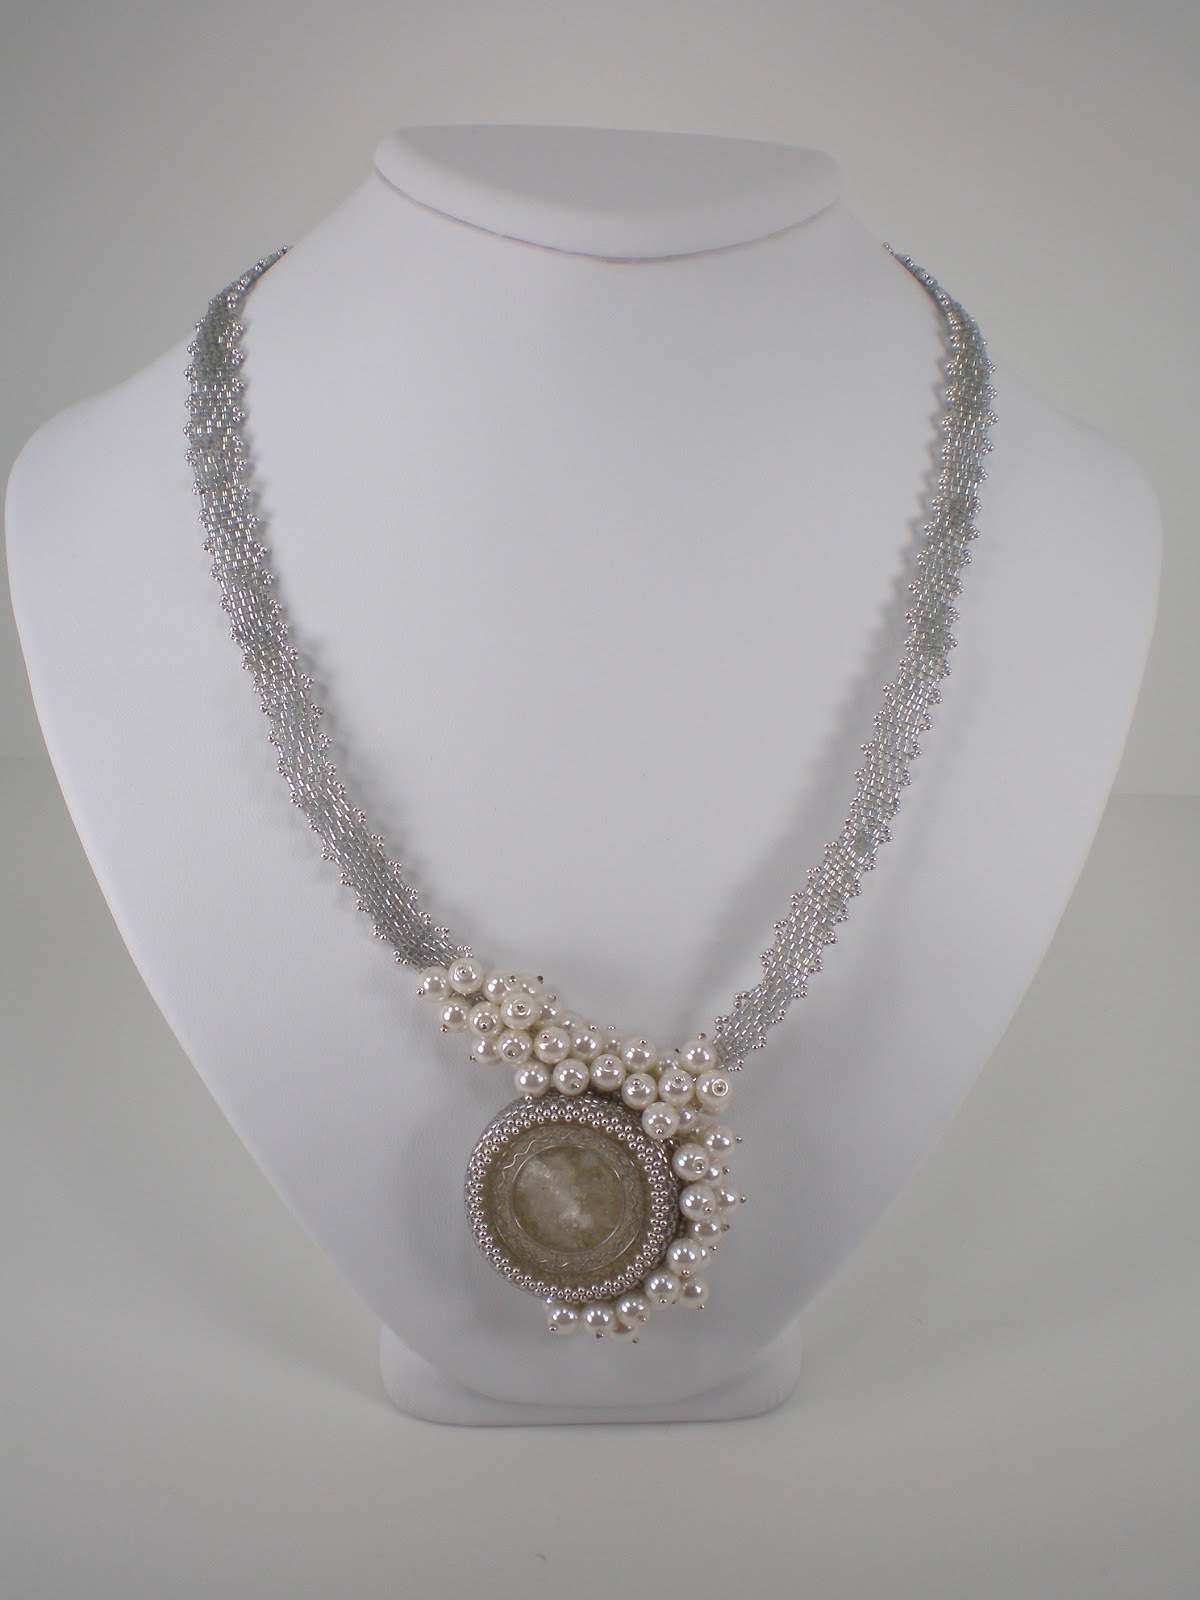 Beaded Expressions by Marla: Necklace Gallery